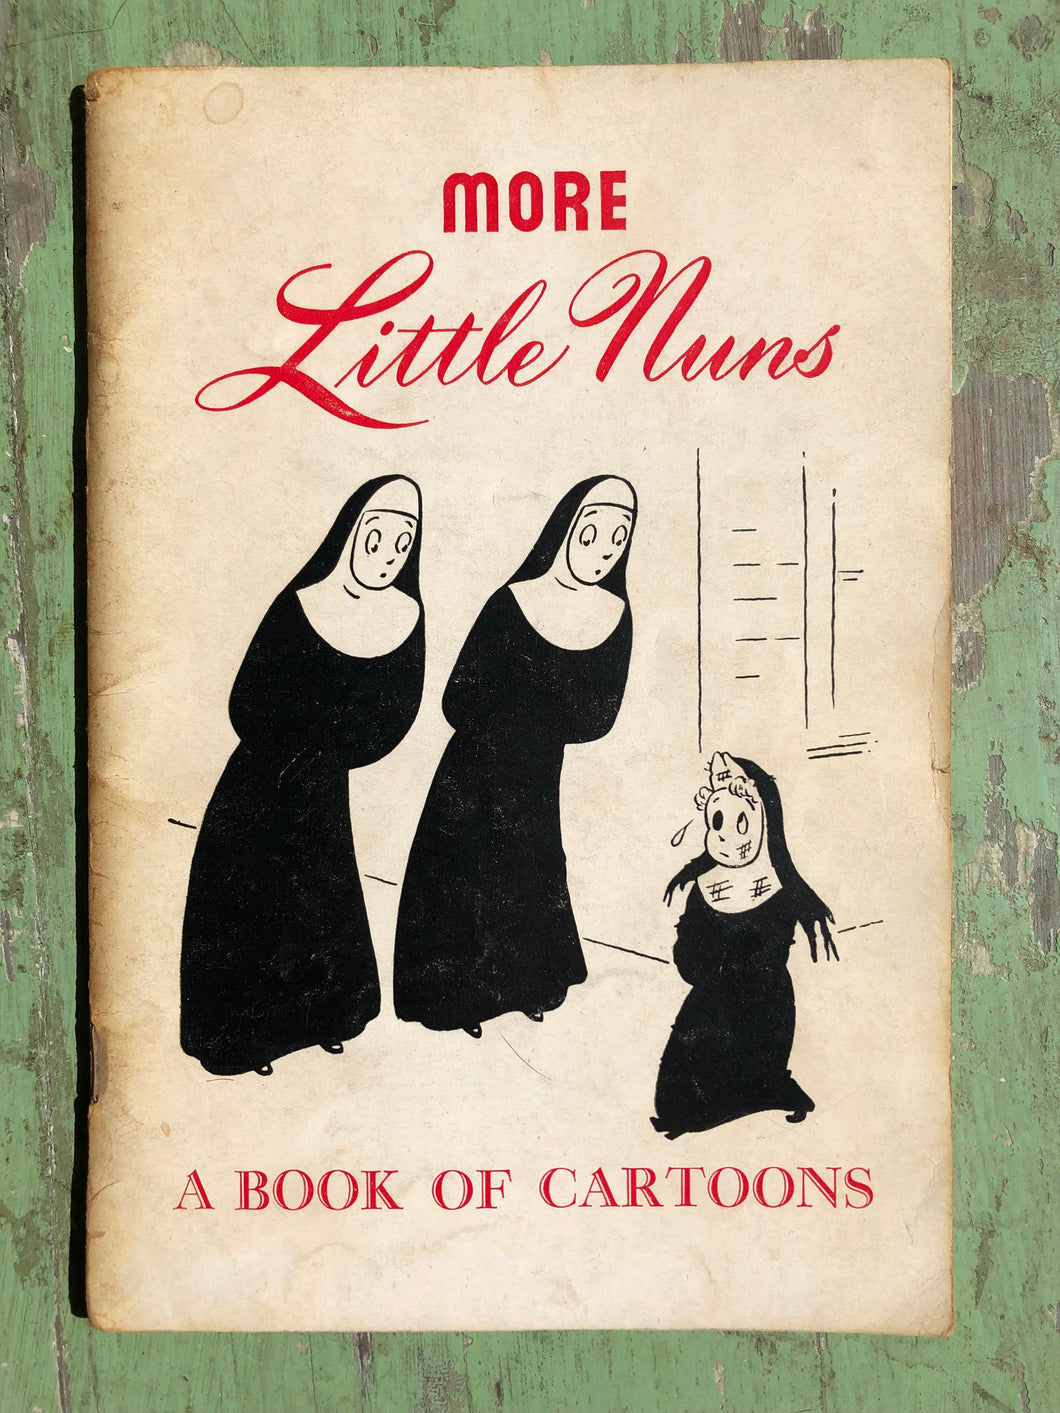 More Little Nuns. A Book of Cartoons by Joe Lane, Compiled by Eileen O’Hayer